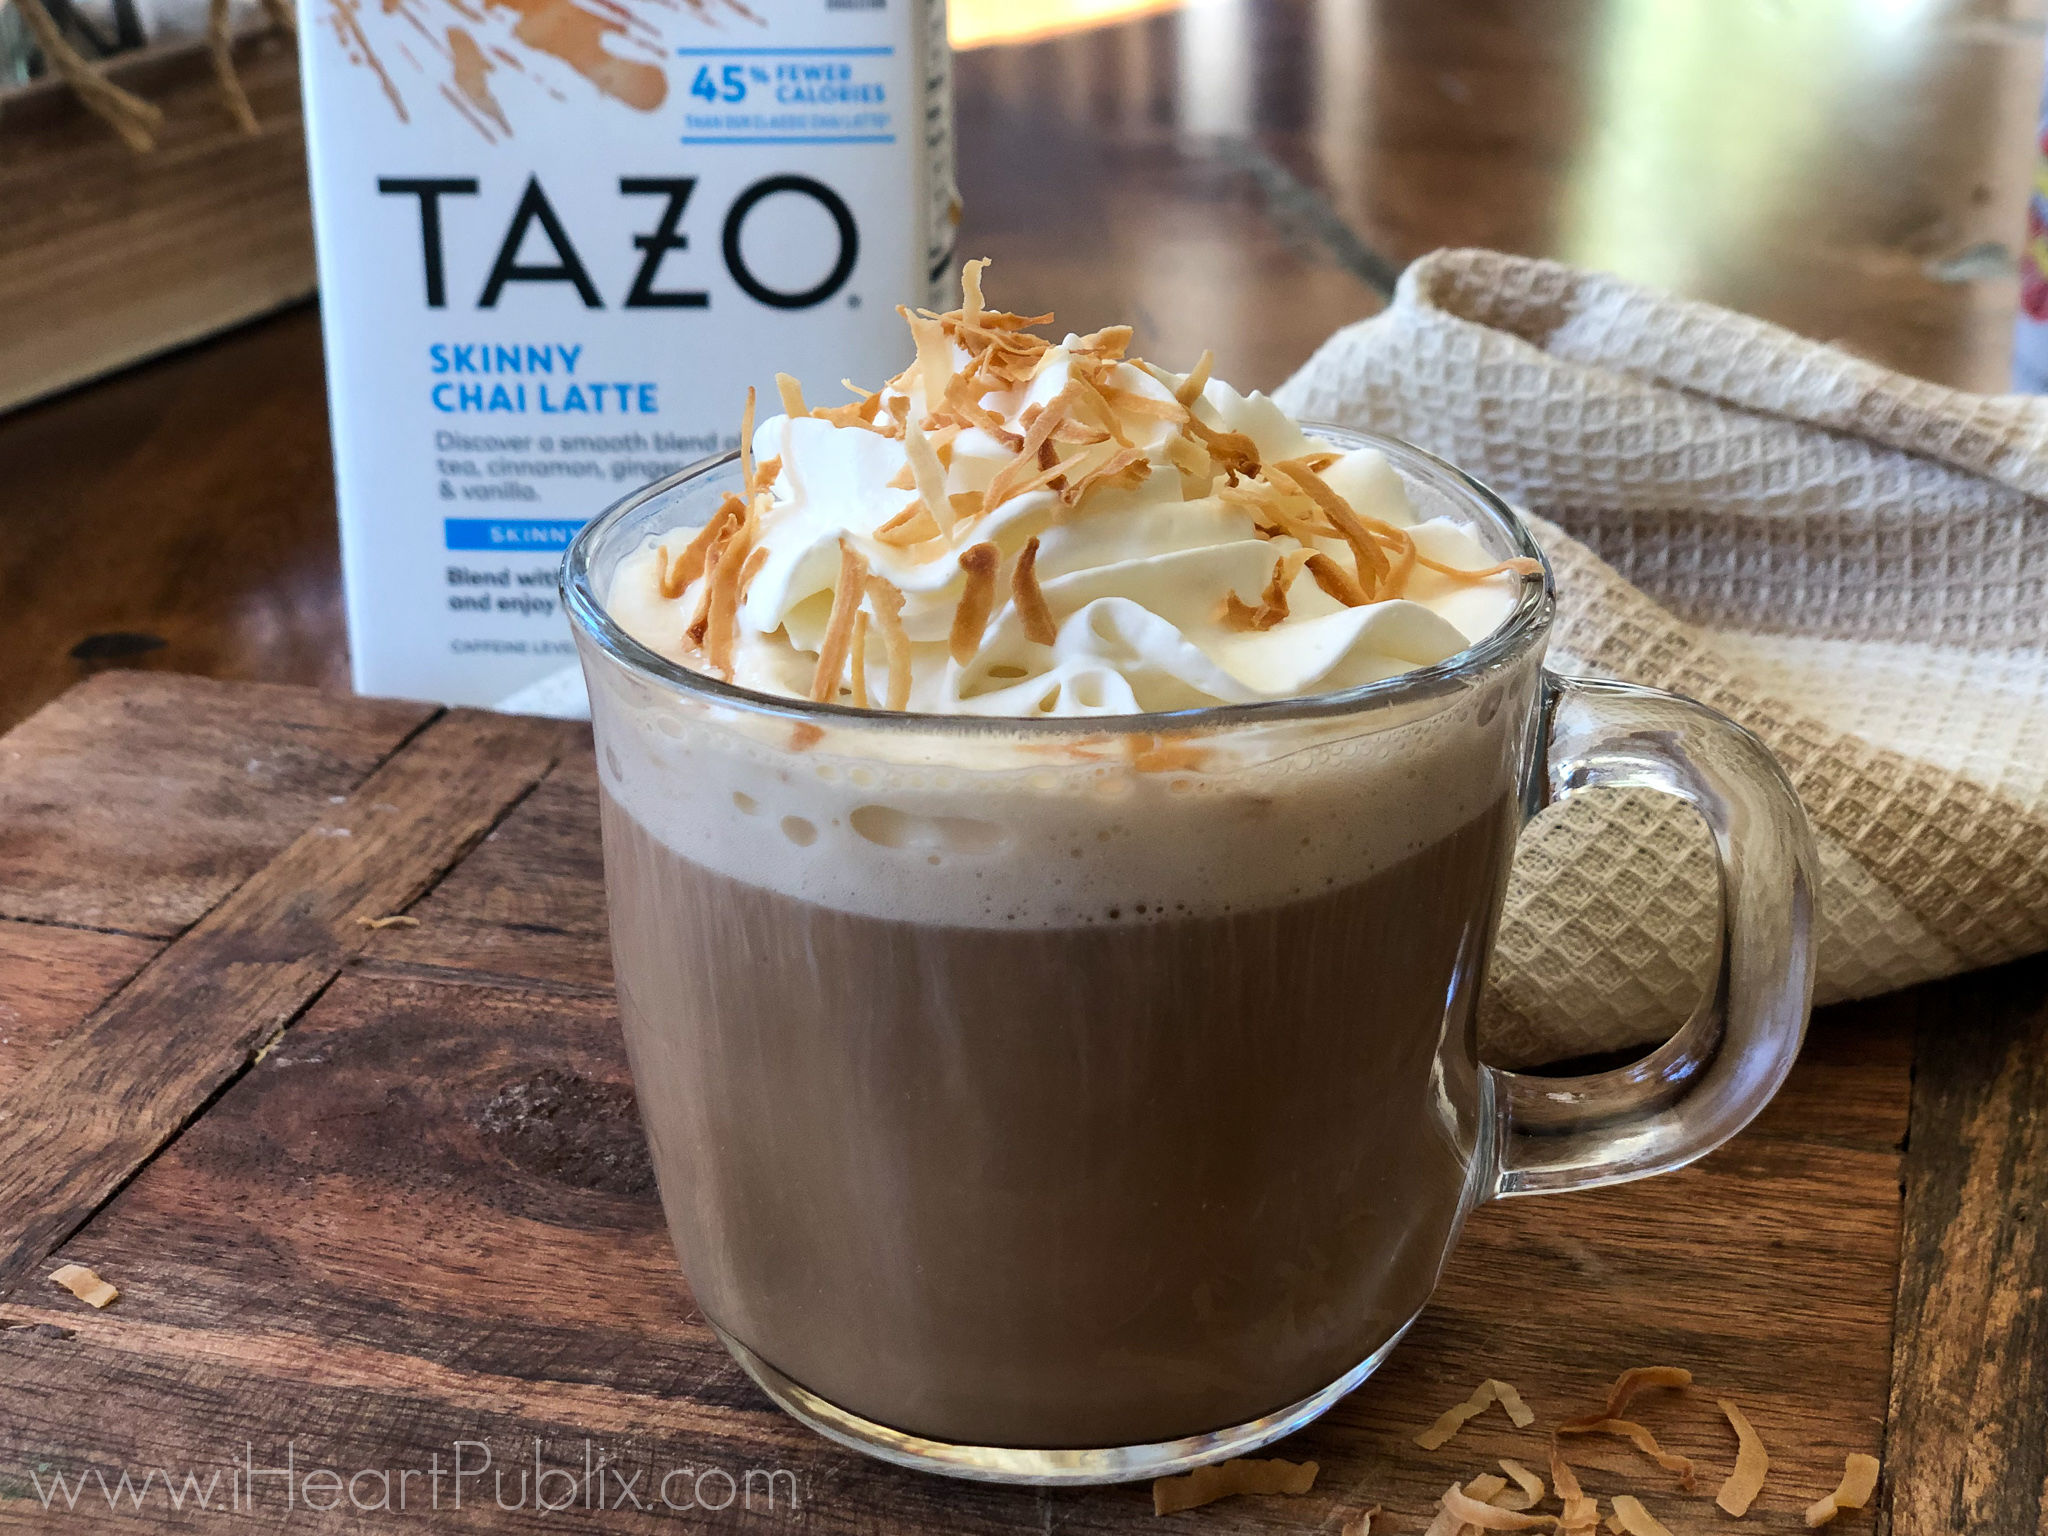 Try This Easy Coconut Chia Latte & Don't Miss Fantastic Savings On TAZO Products At Publix on I Heart Publix